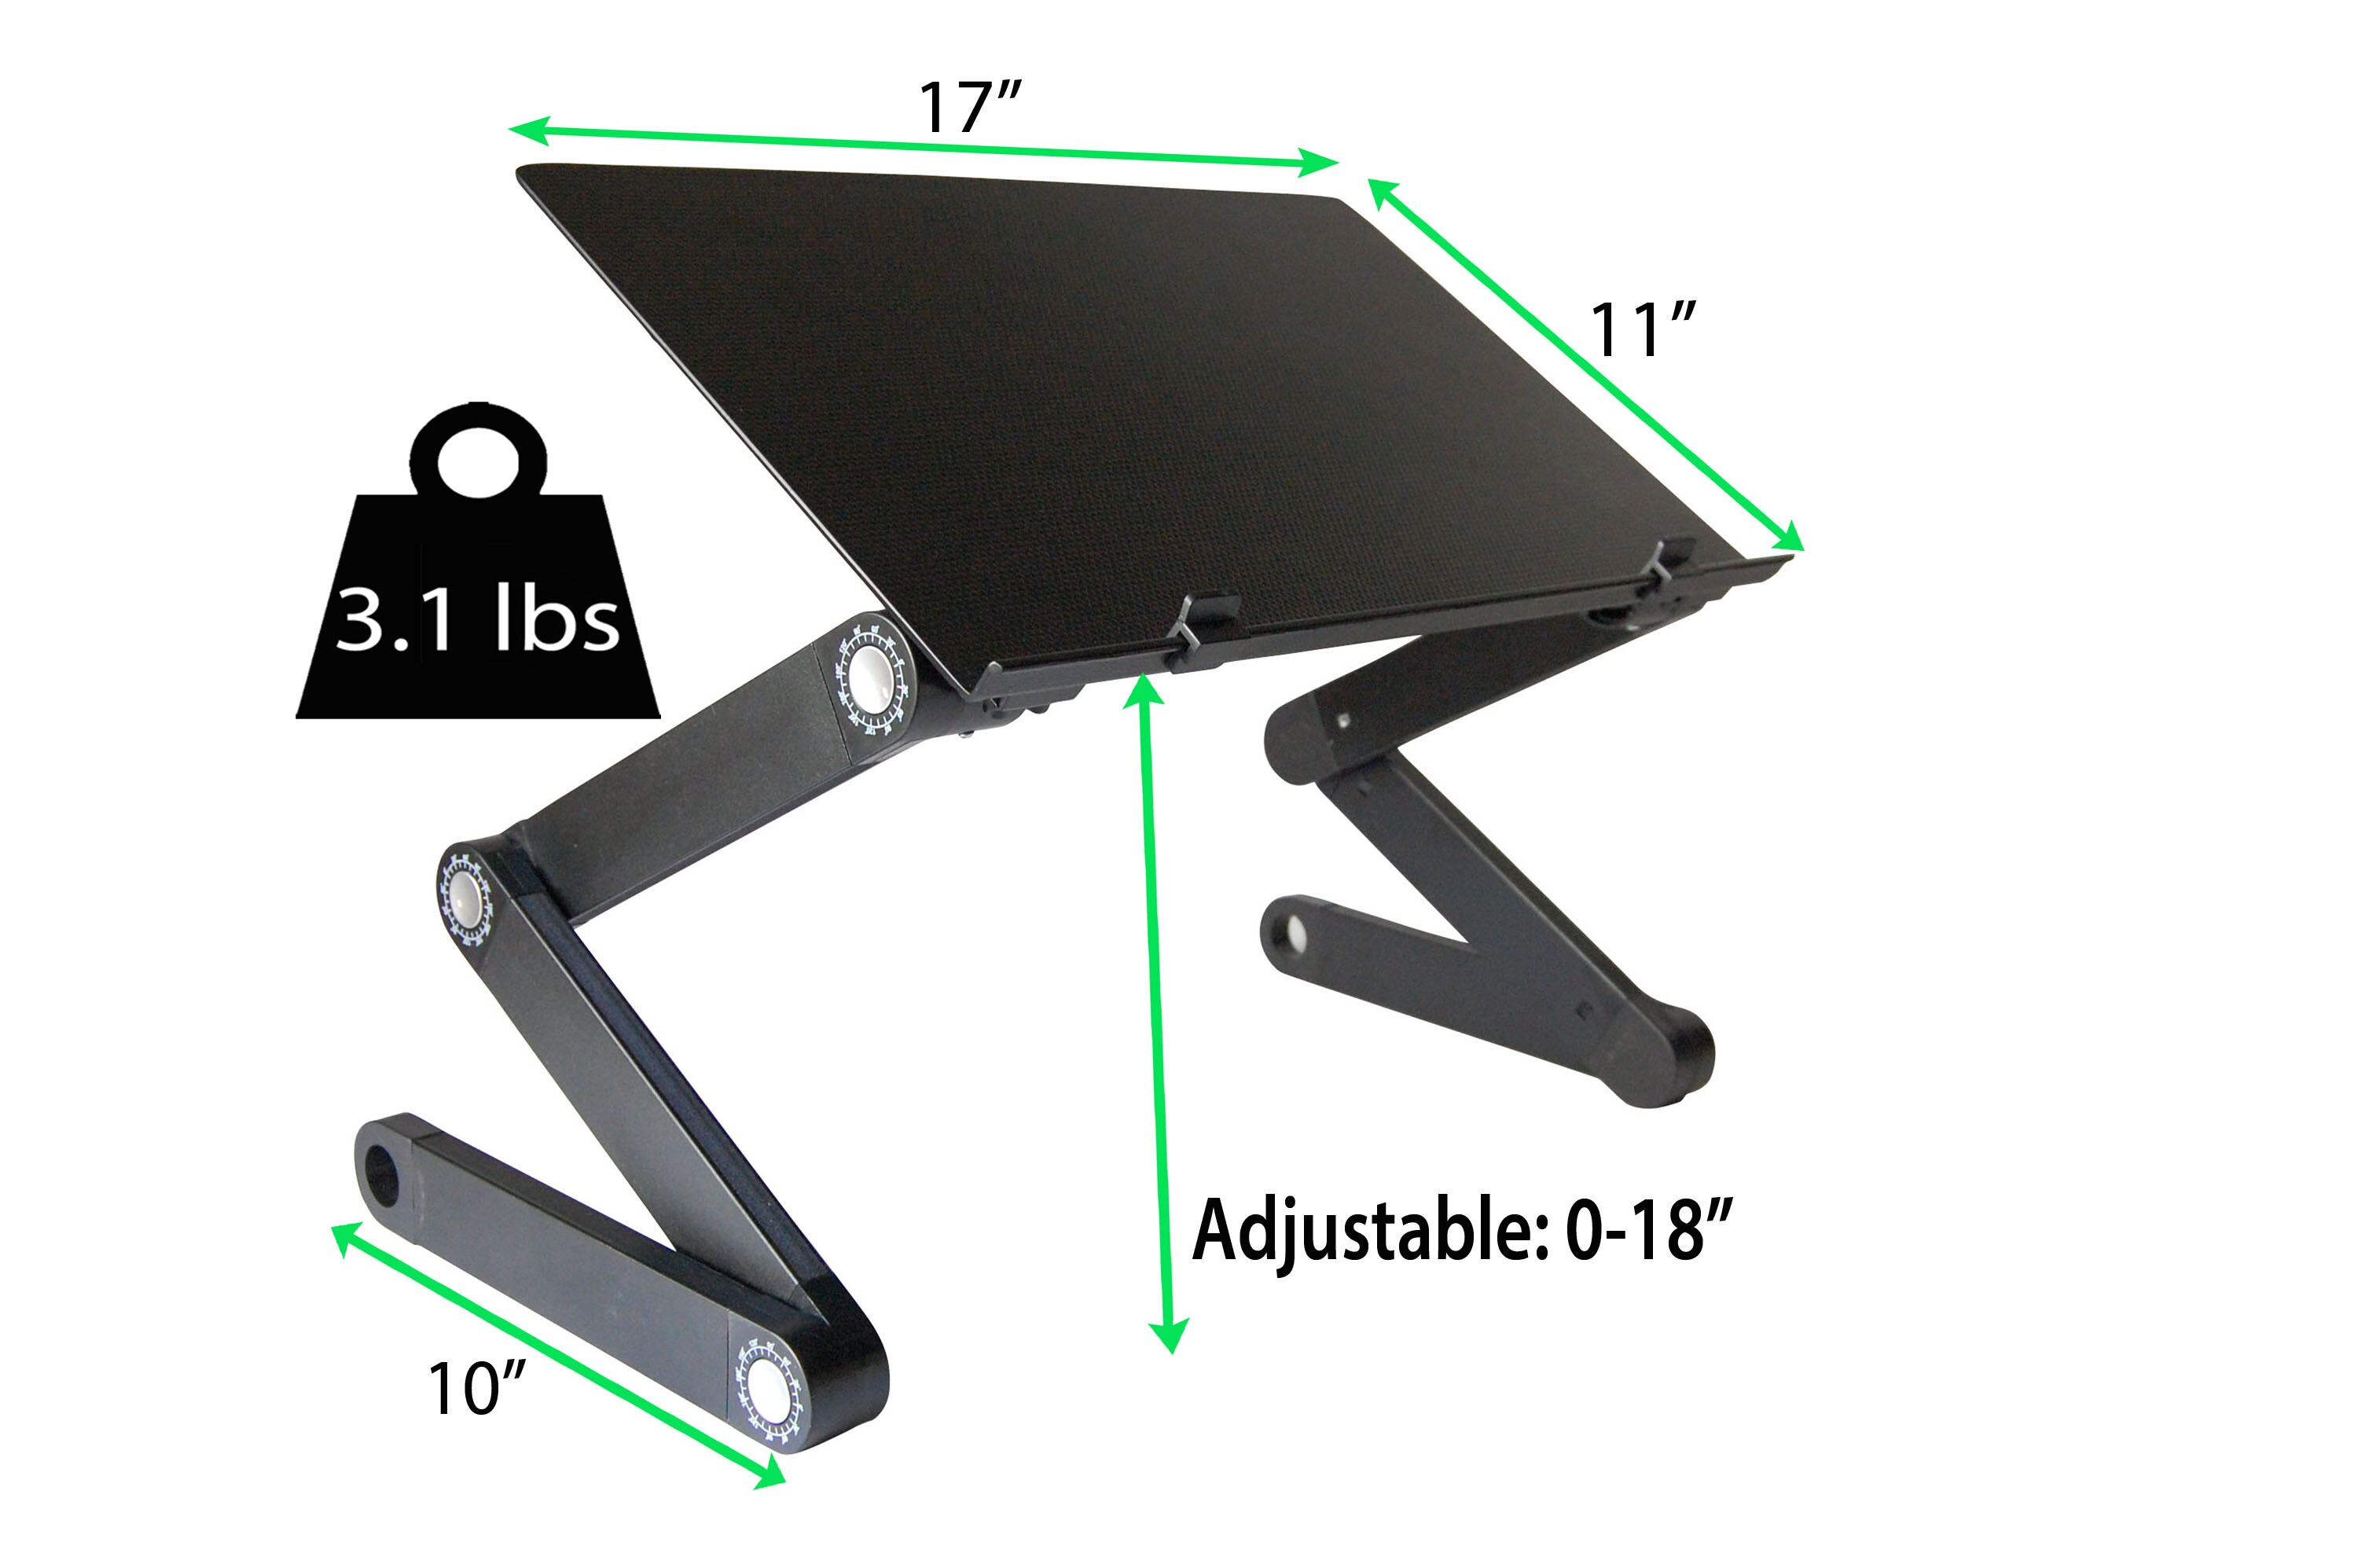 Uncaged Ergonomics Workez Monitor Stand Adjustable in the Office Accessories  department at